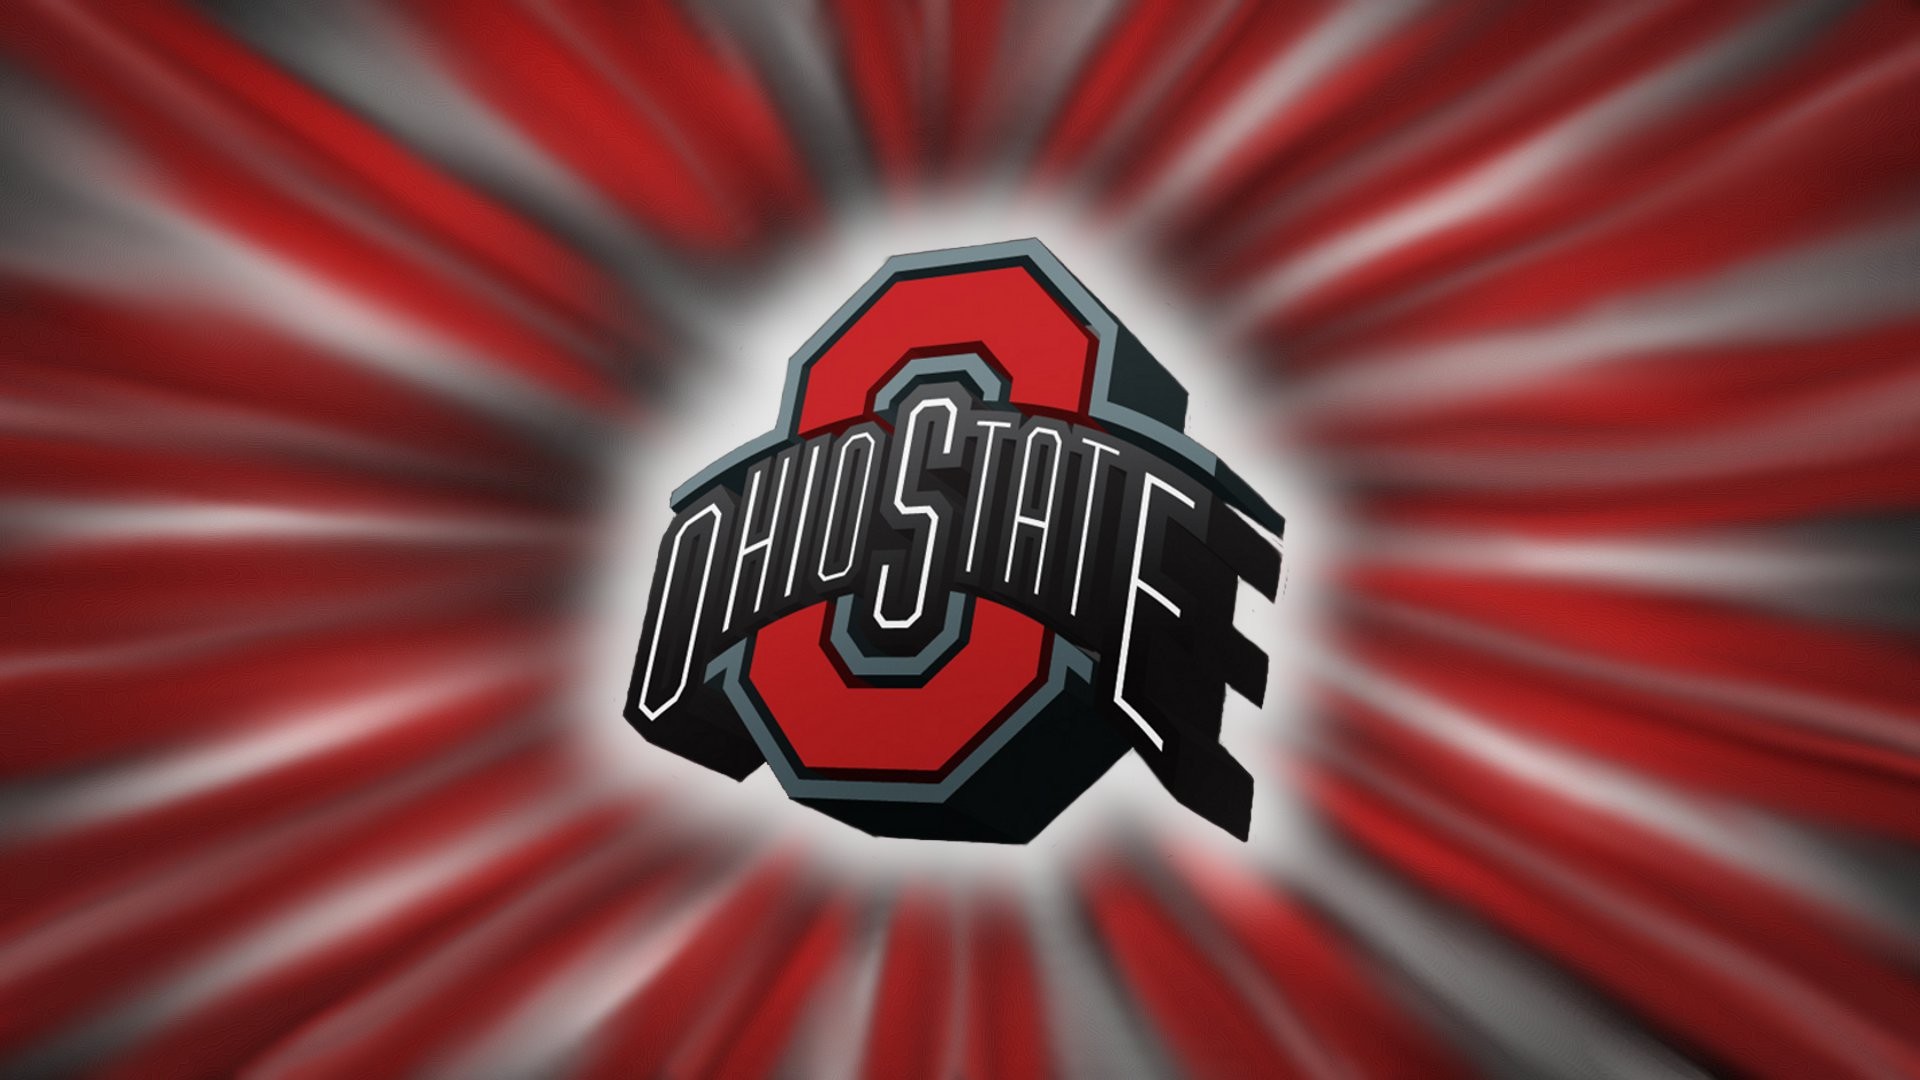 ohio-state-wallpaper-1920x1080-71-images